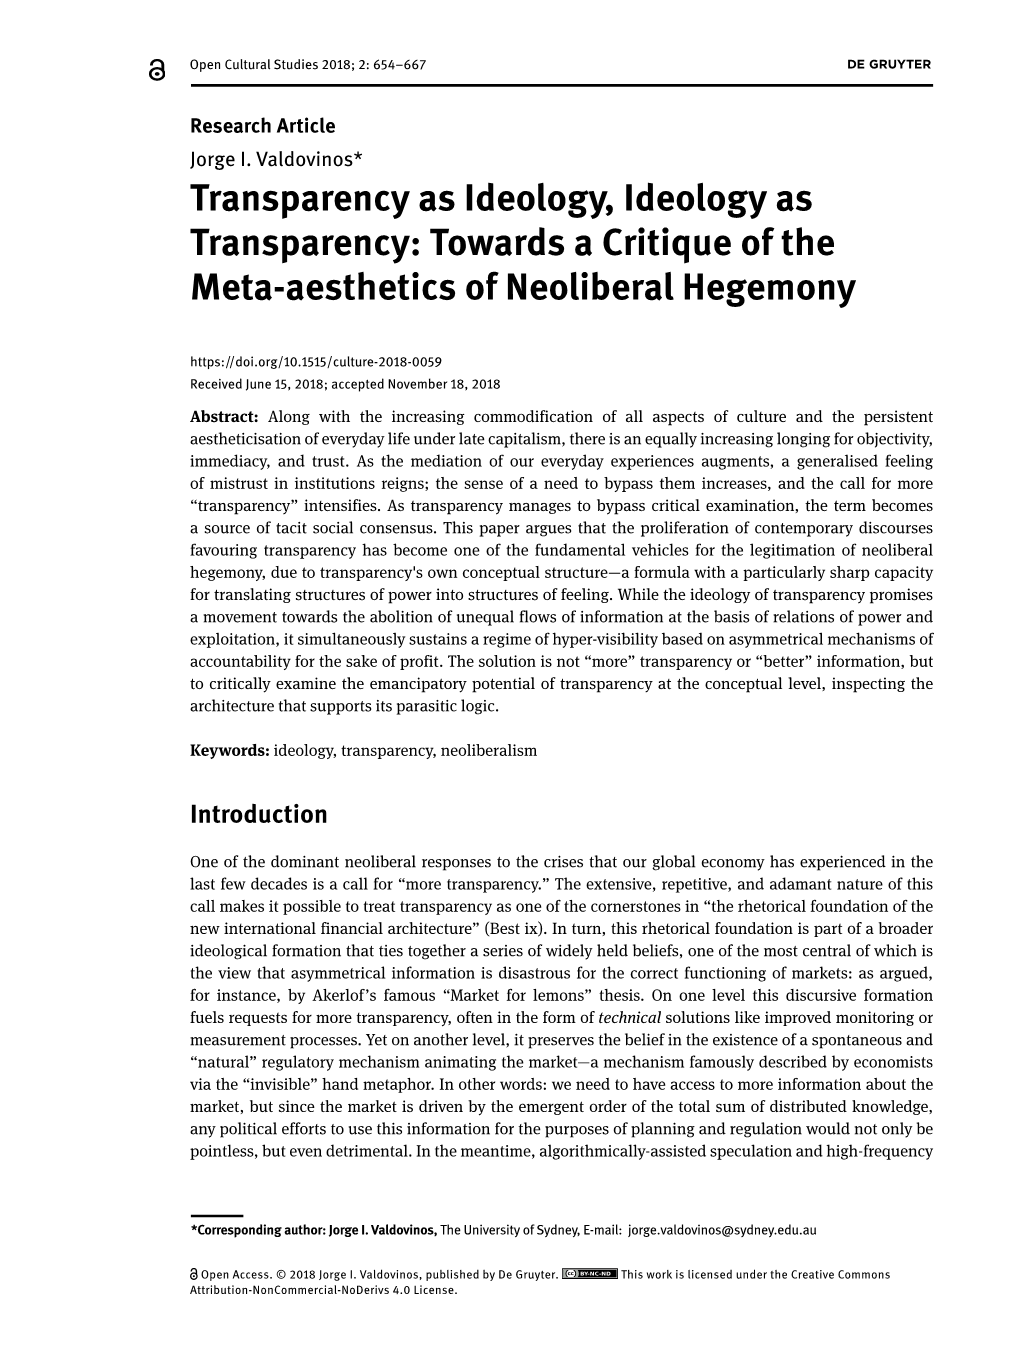 Transparency As Ideology, Ideology As Transparency: Towards a Critique of the Meta-Aesthetics of Neoliberal Hegemony